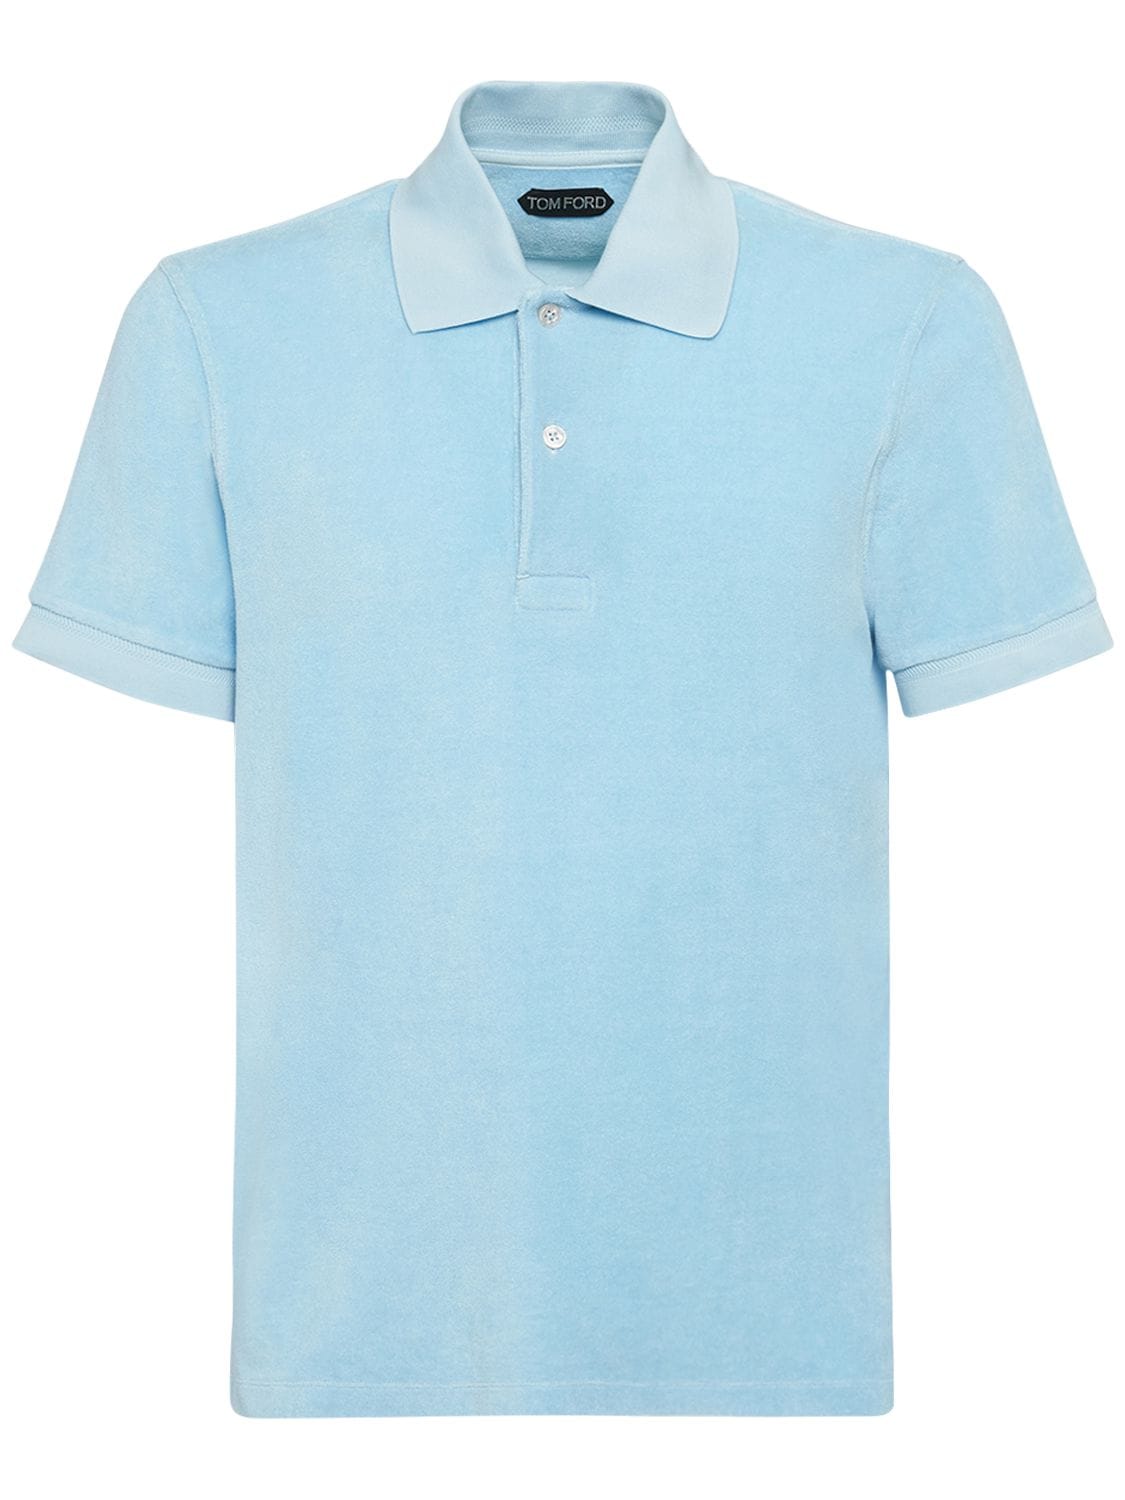 Tom Ford Toweling Cotton Blend Polo Shirt In Pale Sky